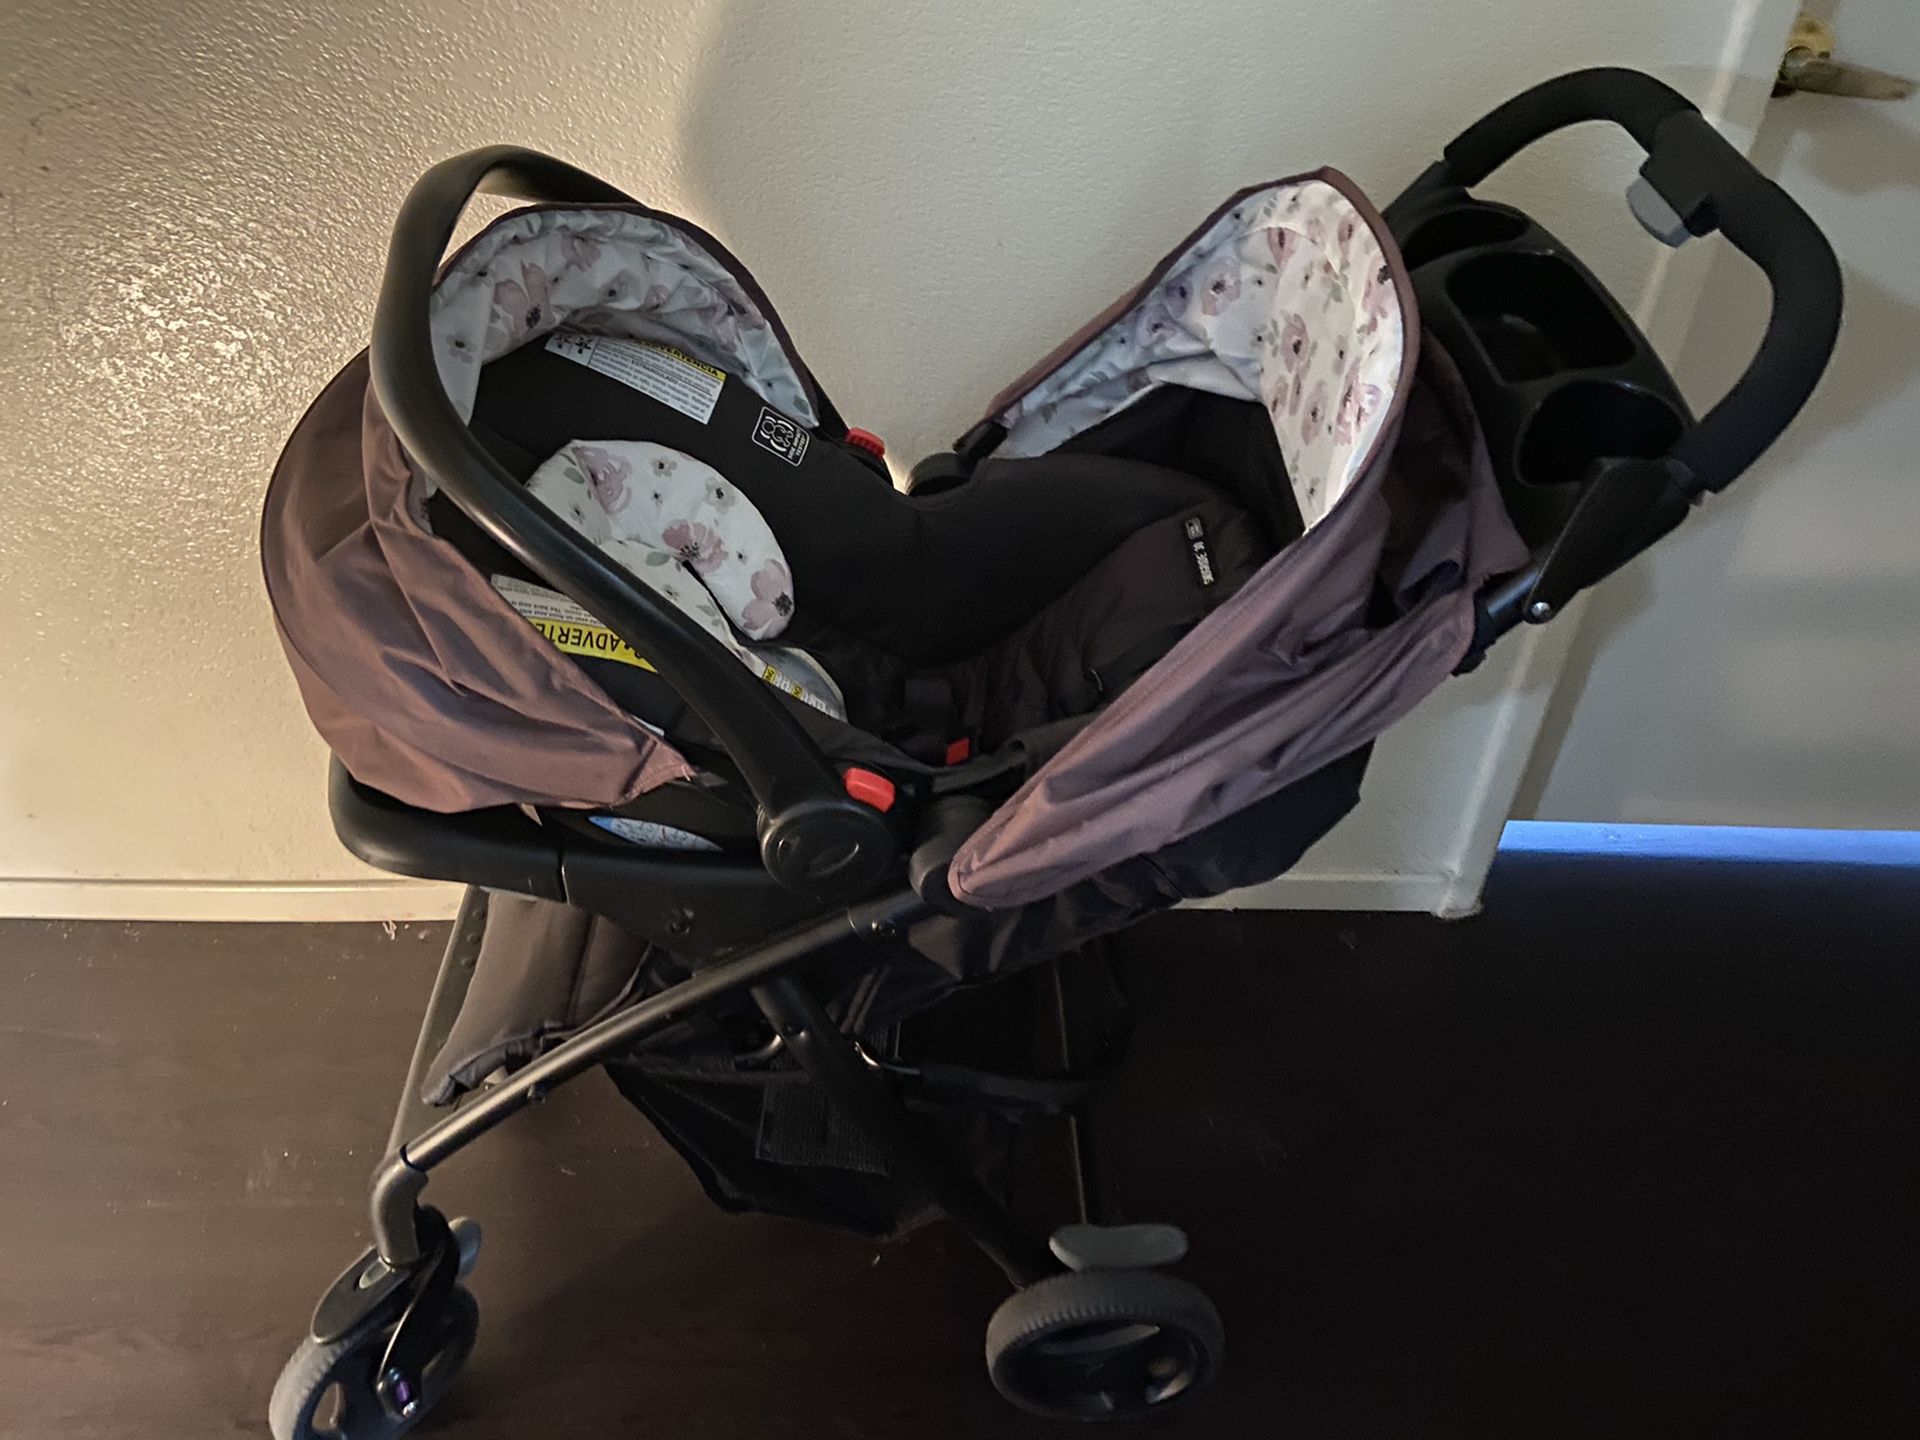 Graco stroller car seat and base